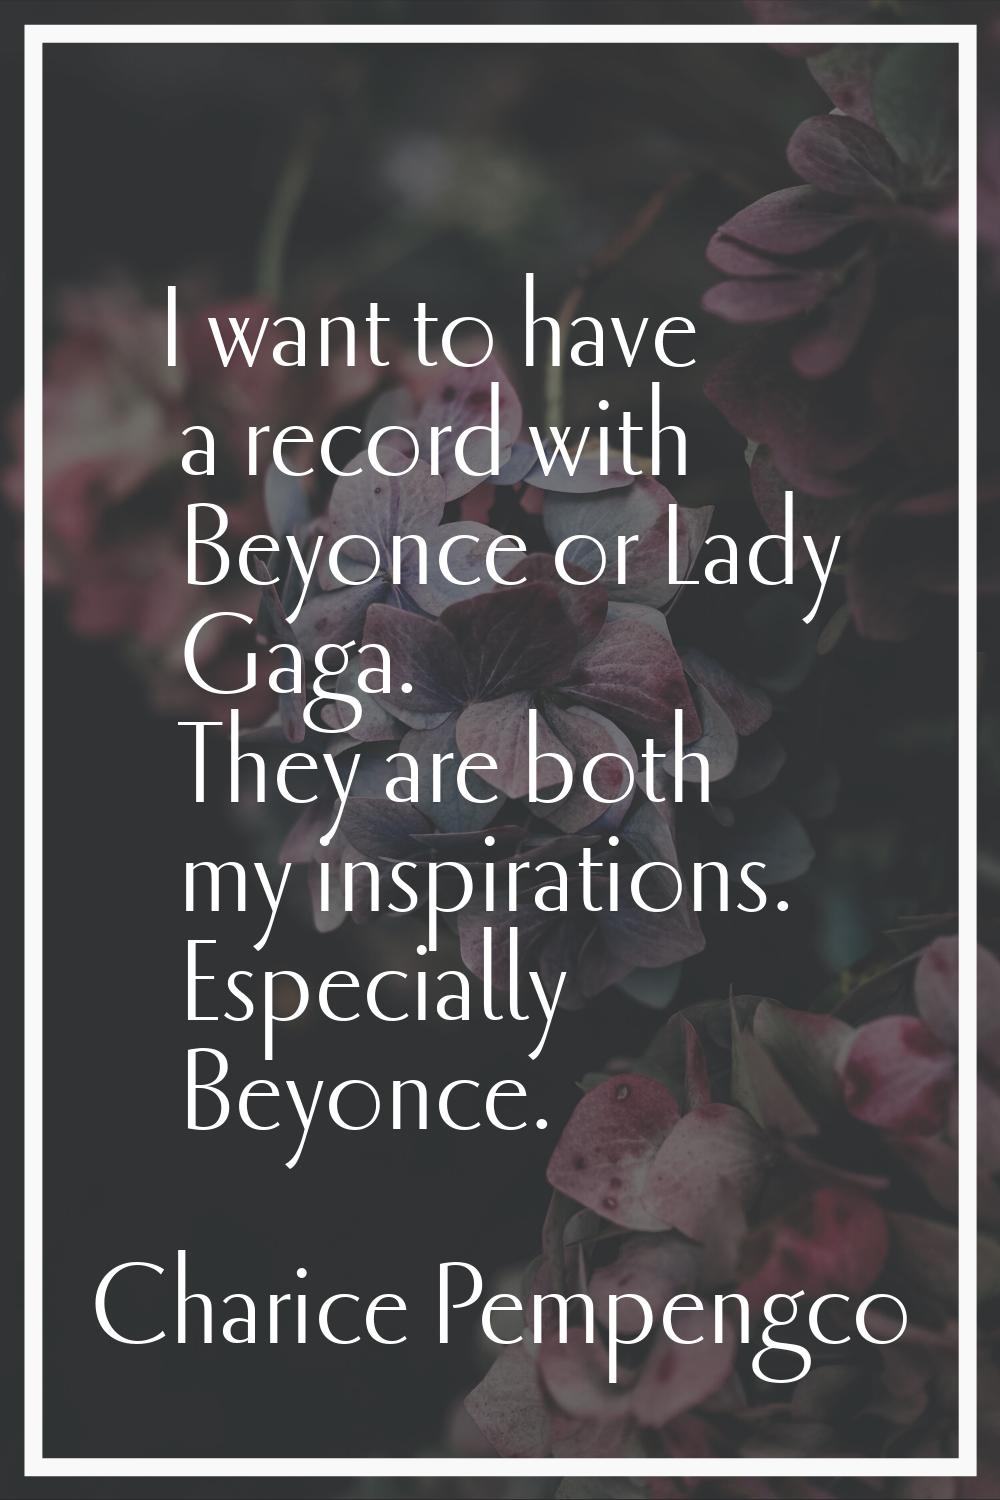 I want to have a record with Beyonce or Lady Gaga. They are both my inspirations. Especially Beyonc